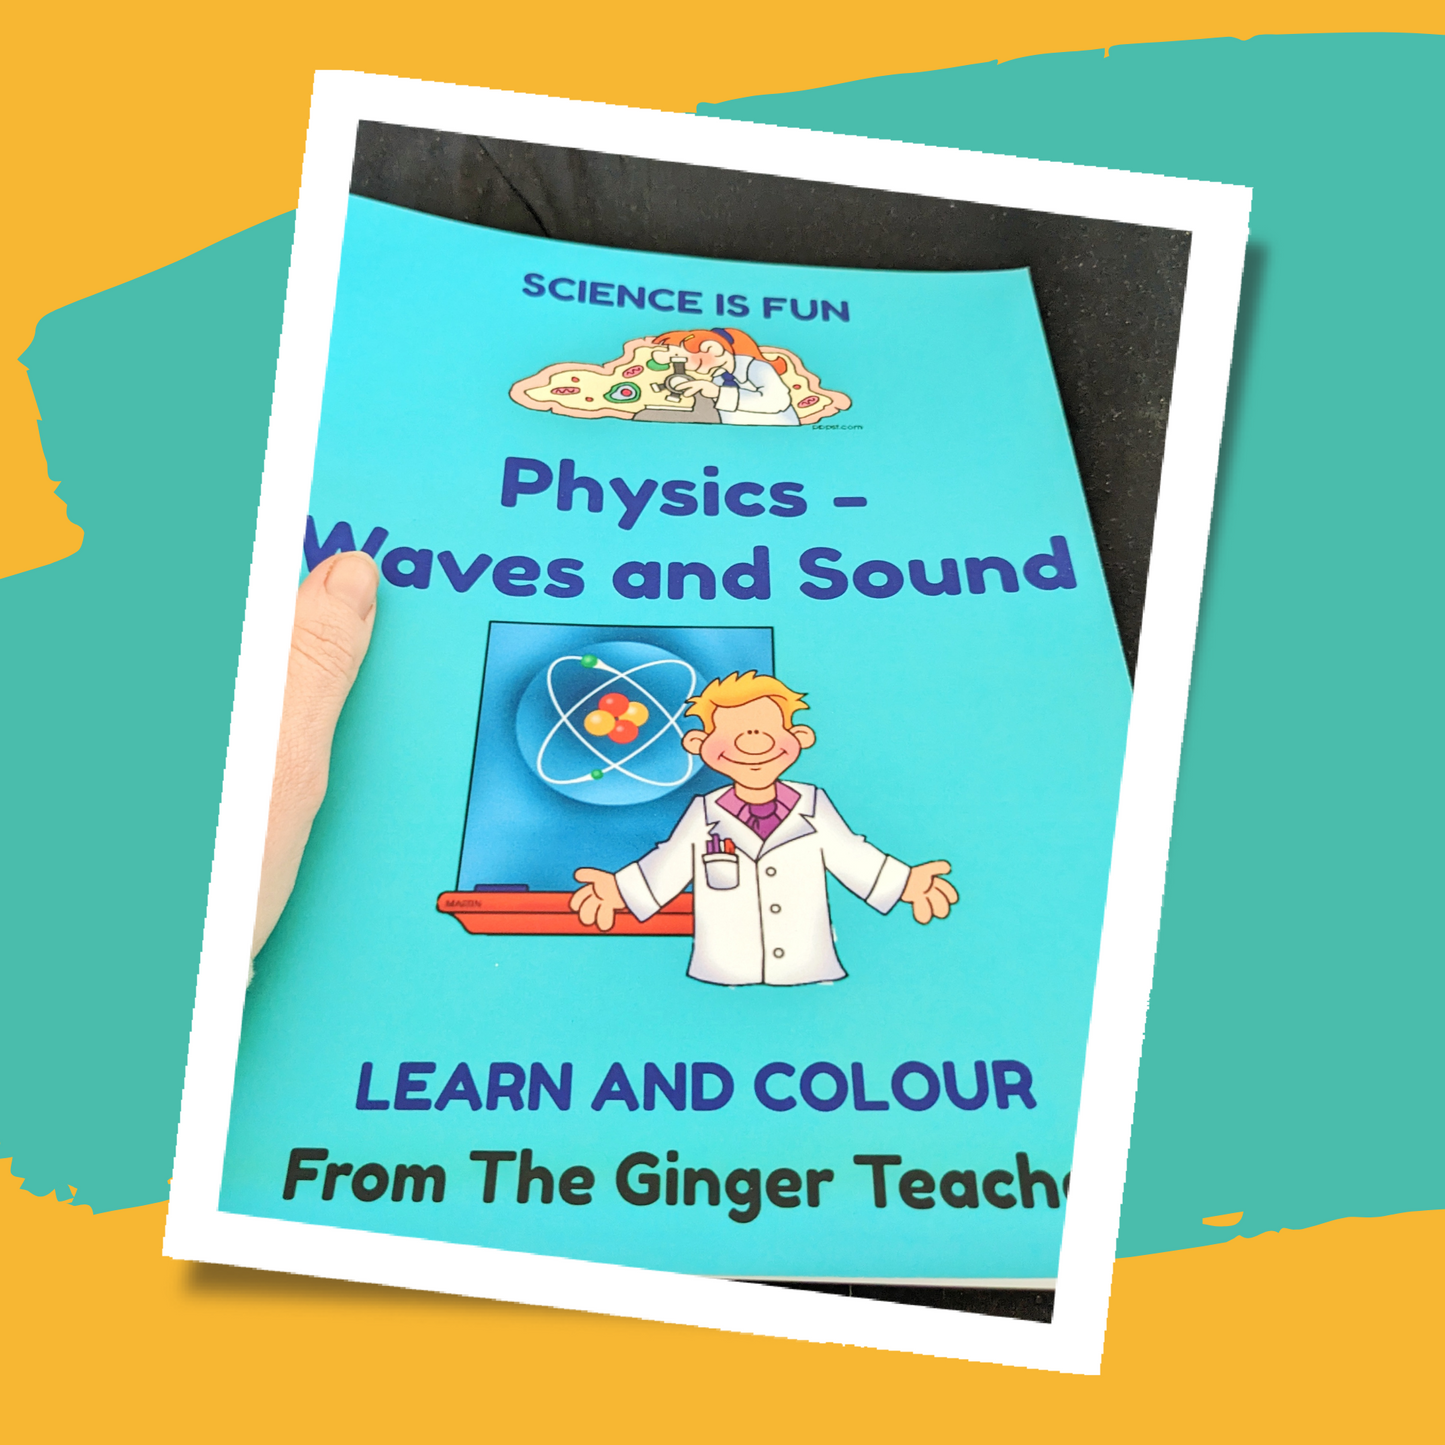 Waves and Sound Science Workbook